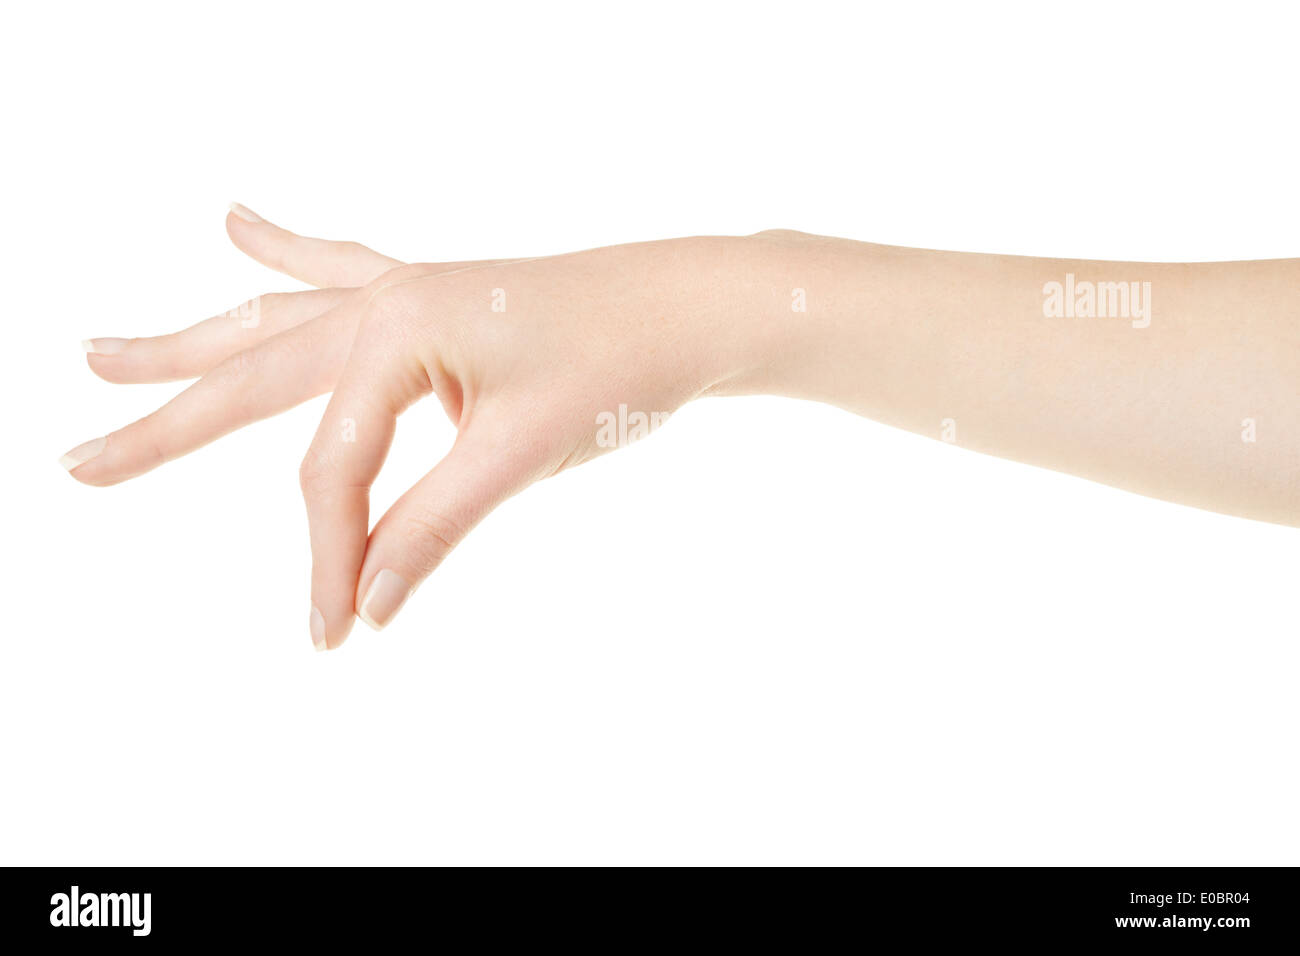 Woman hand with manicure holding items Stock Photo